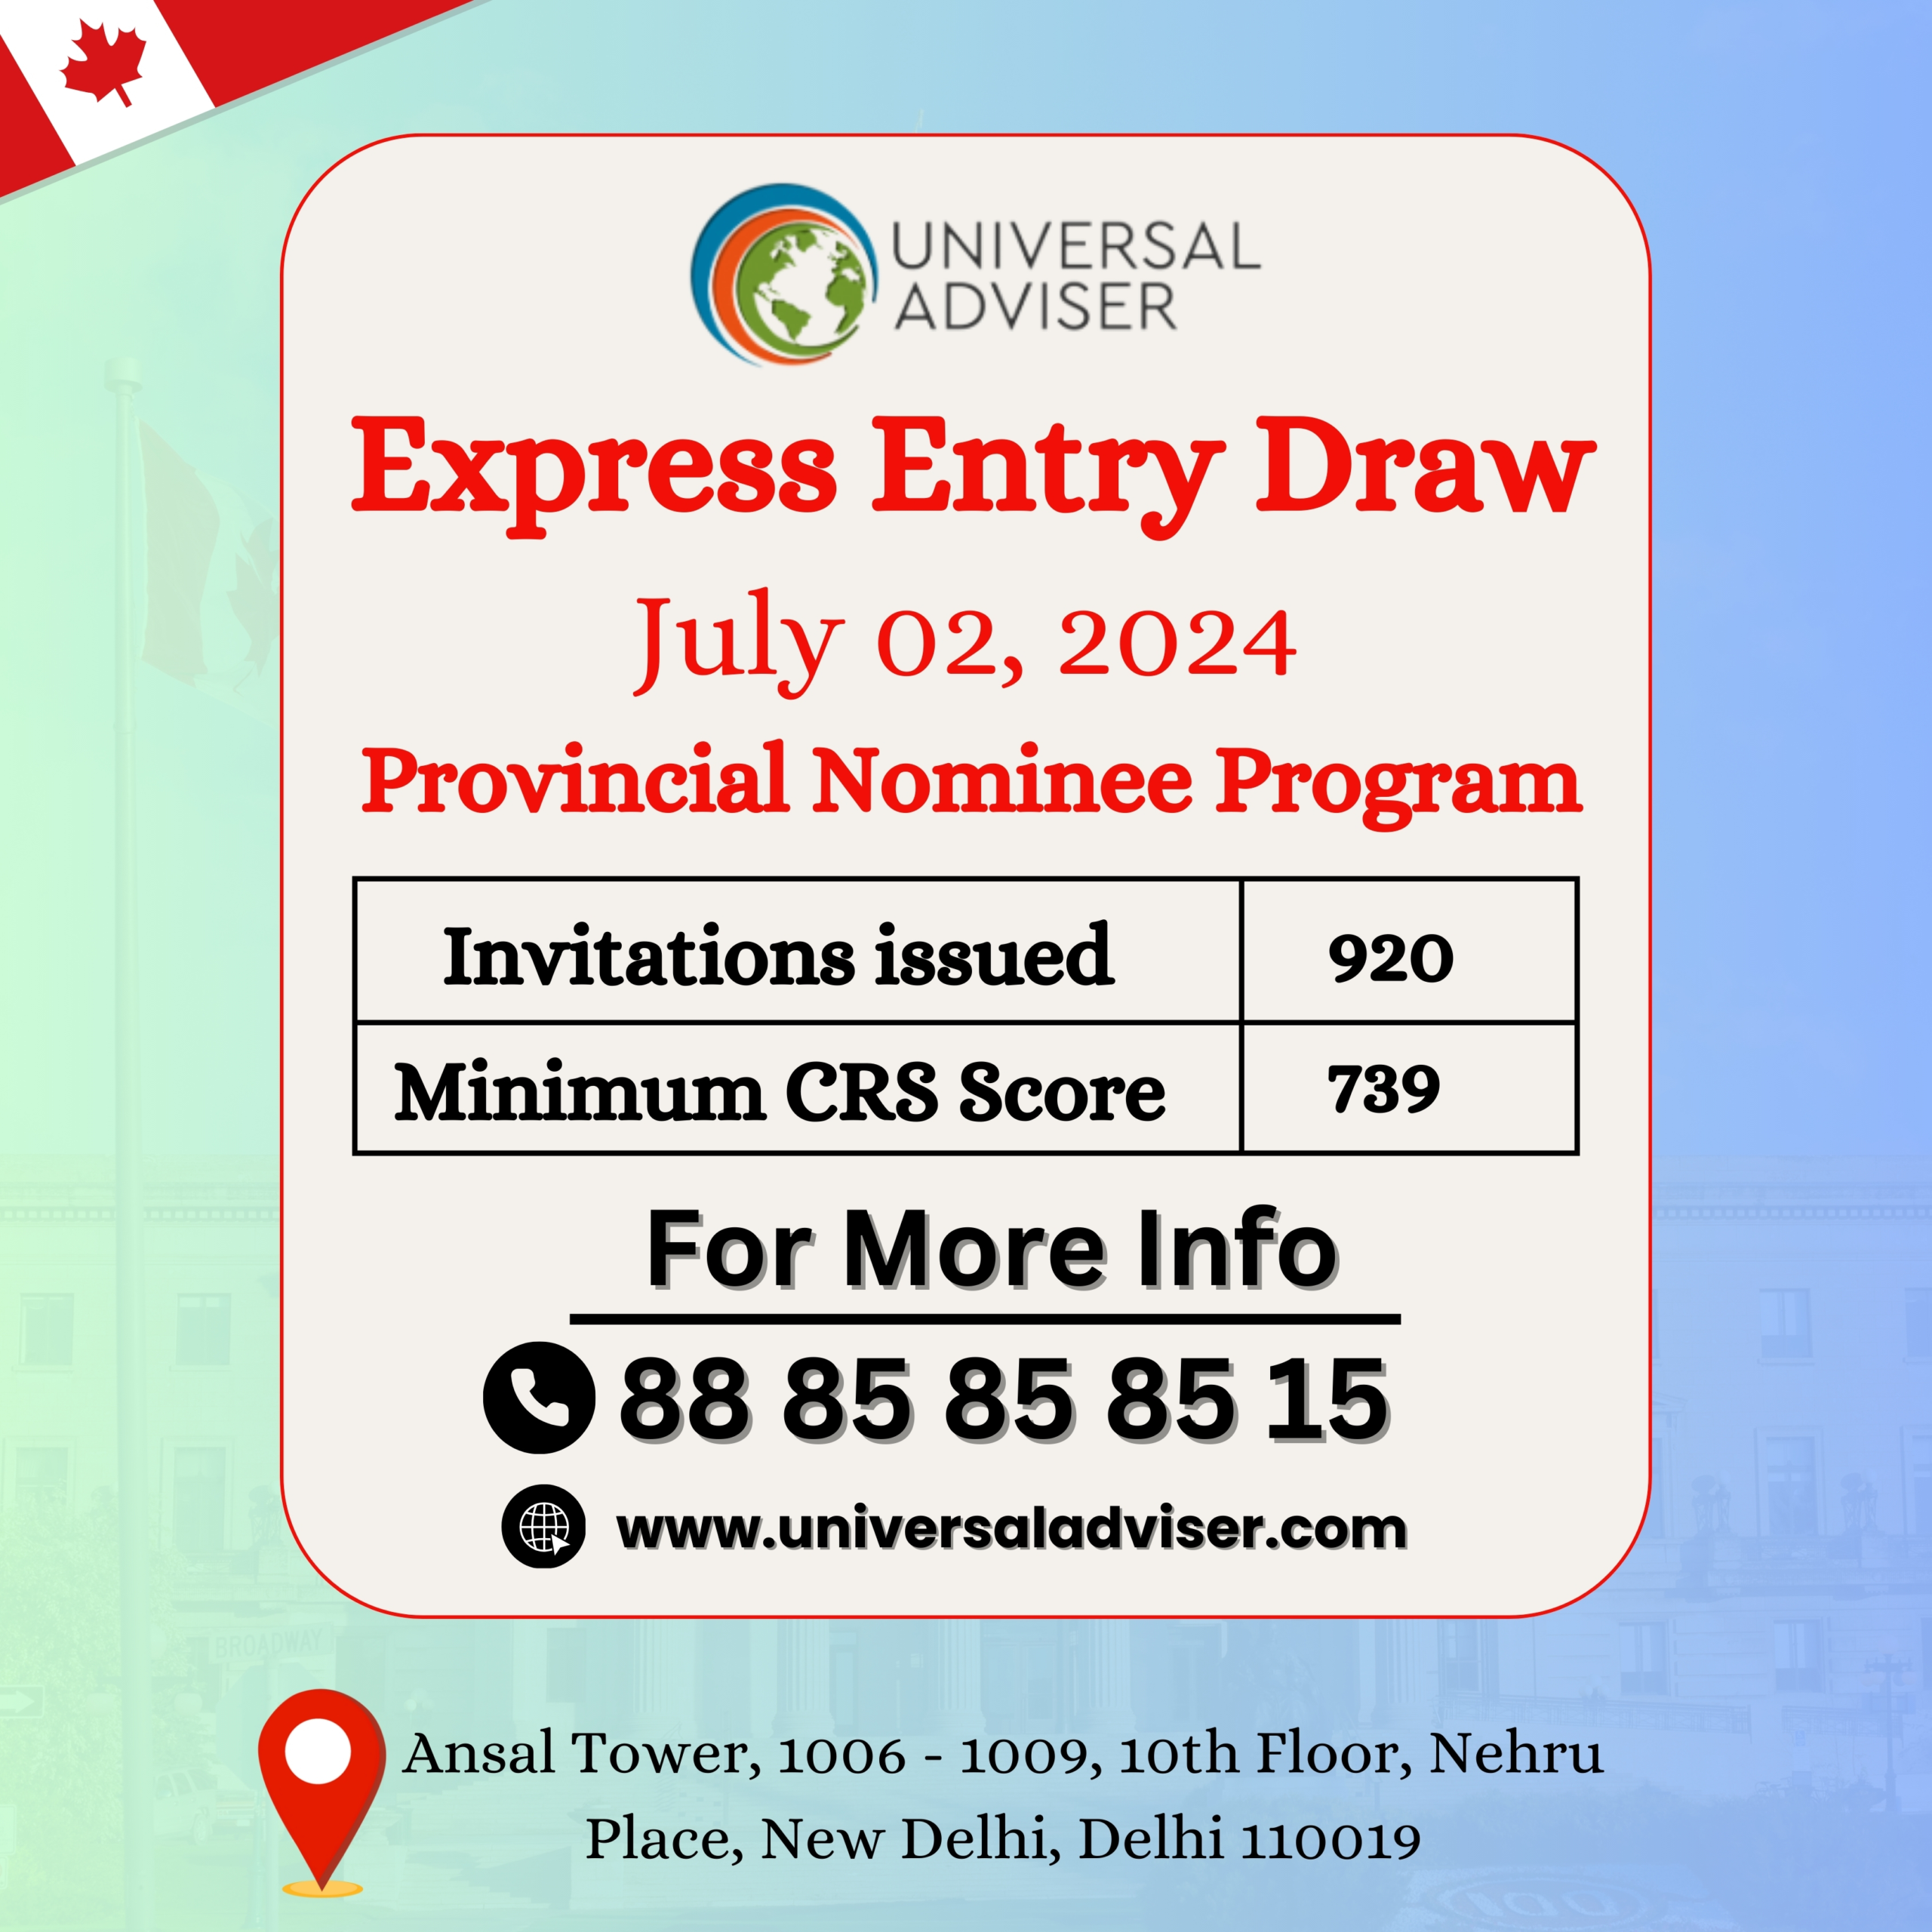 Latest Express Entry Draw issues 920 invites